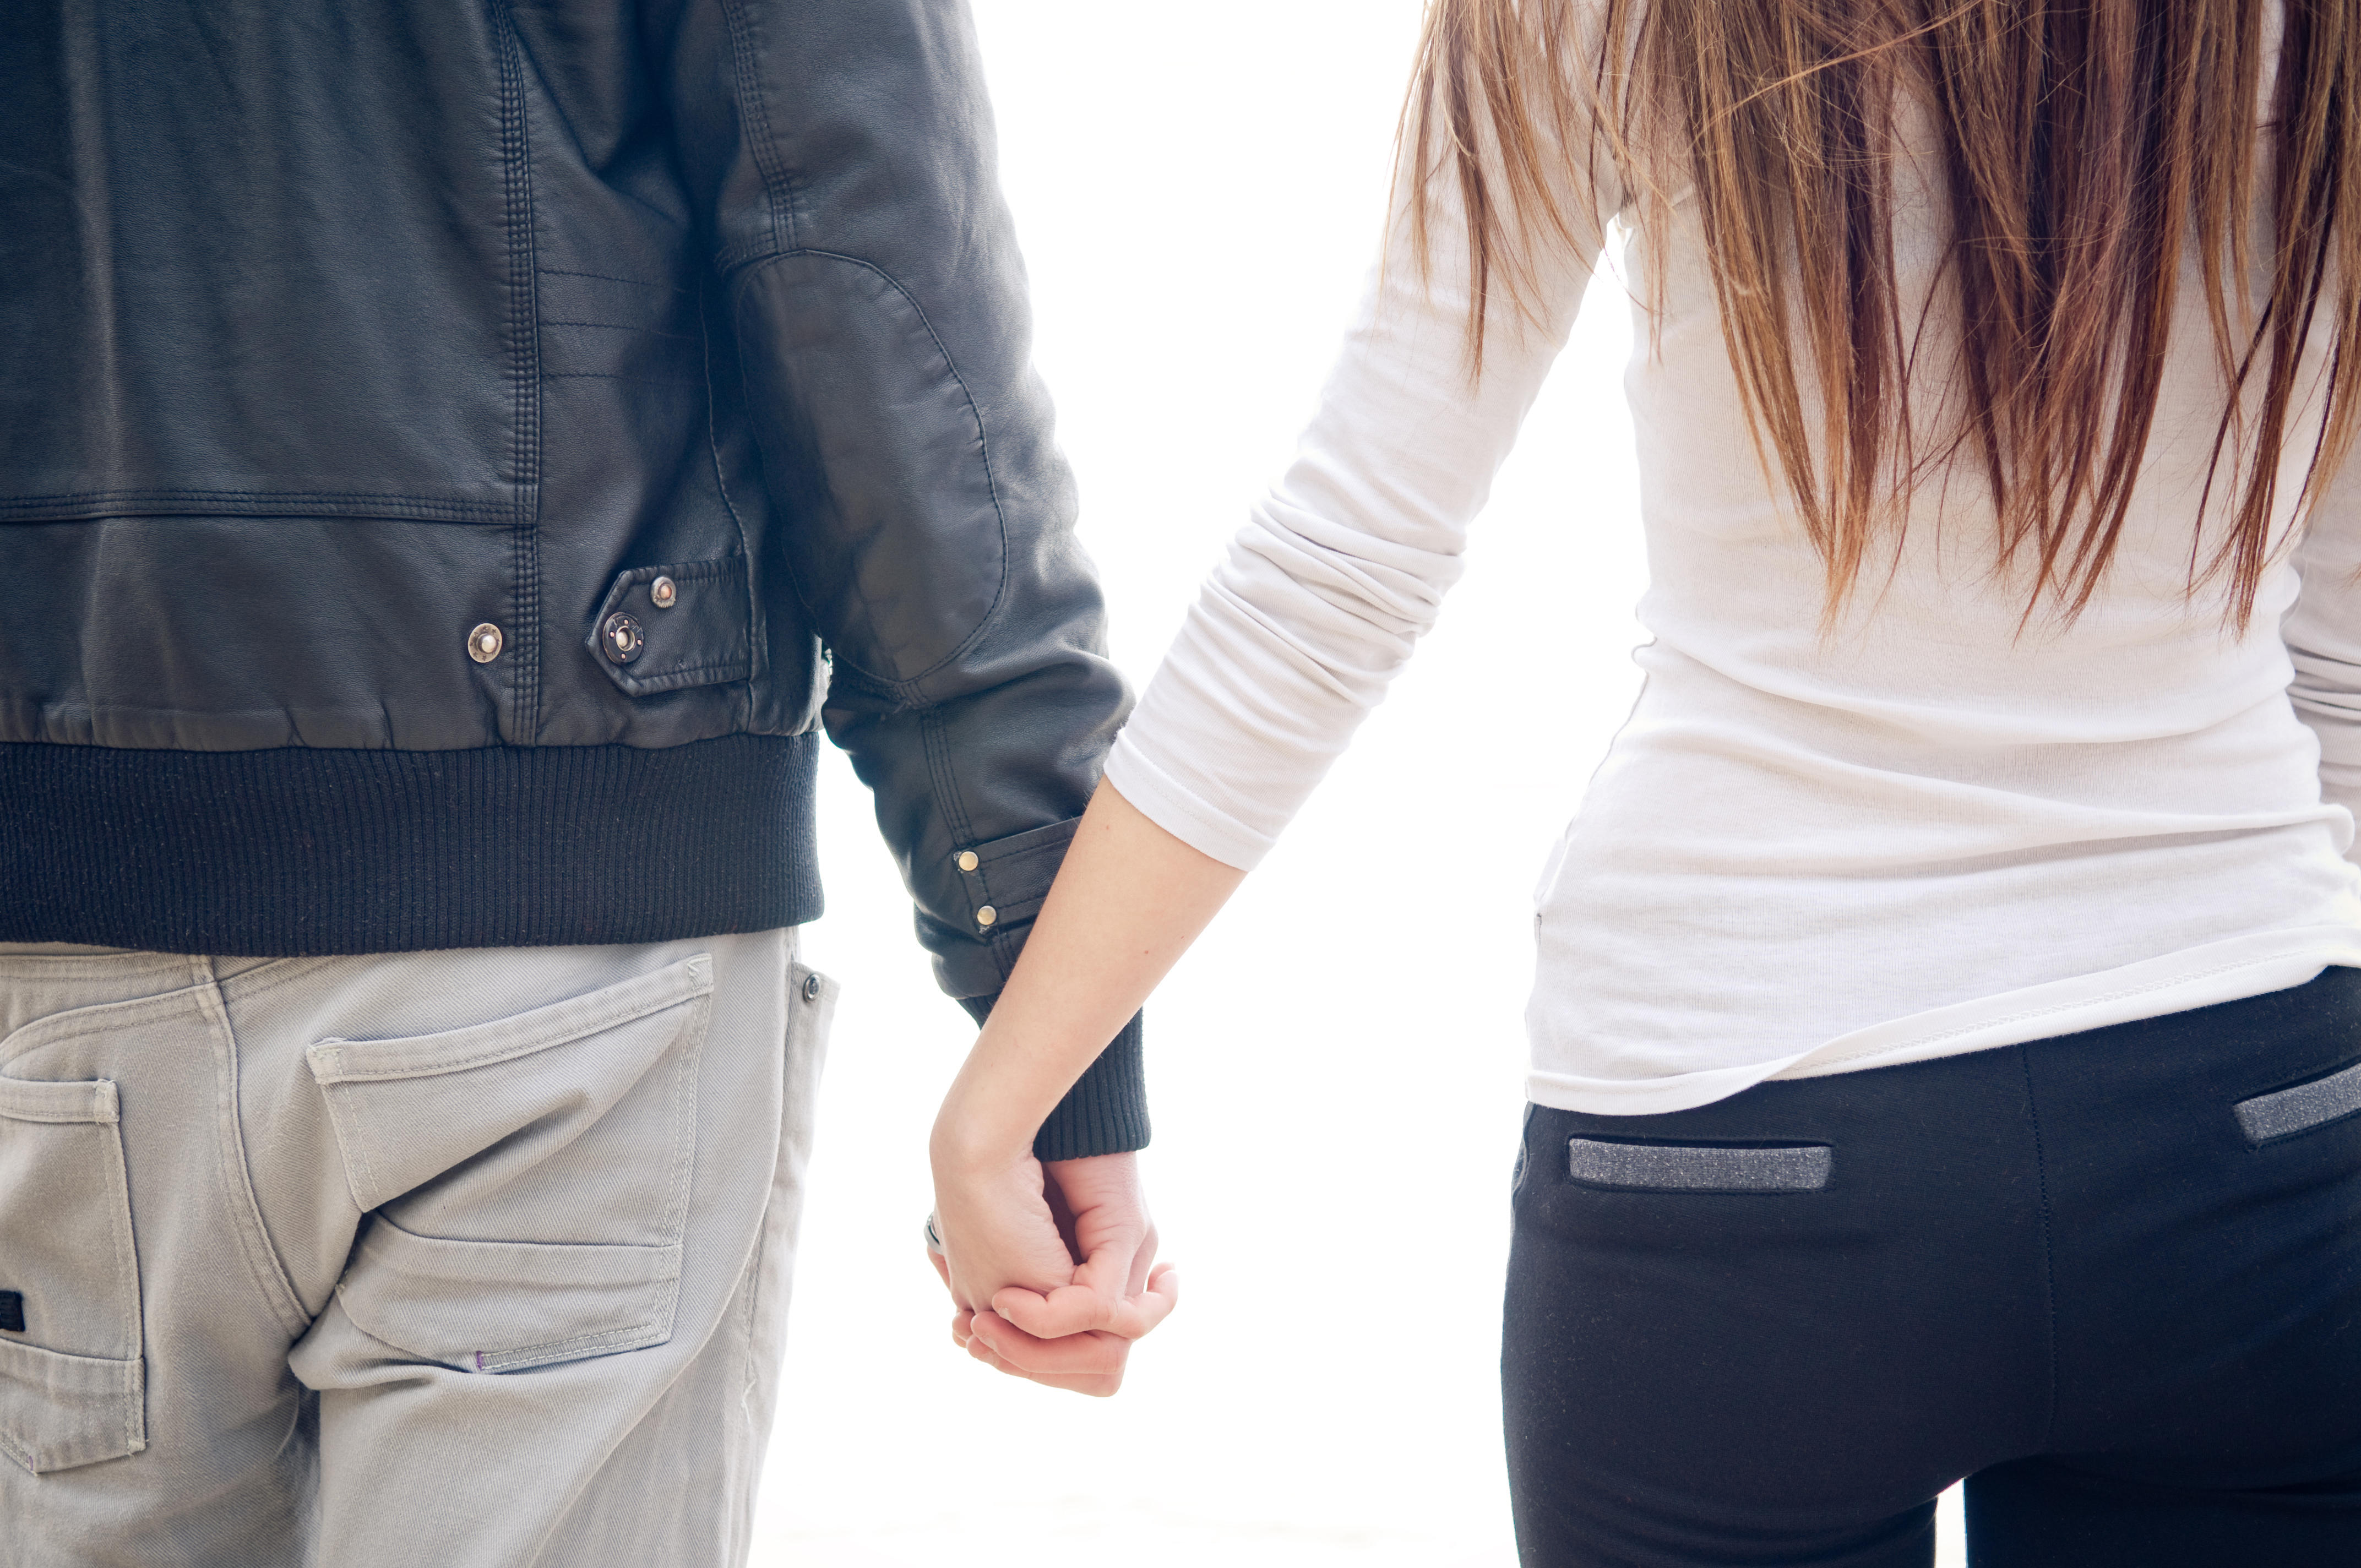 How to guide teen girls through love, relationships